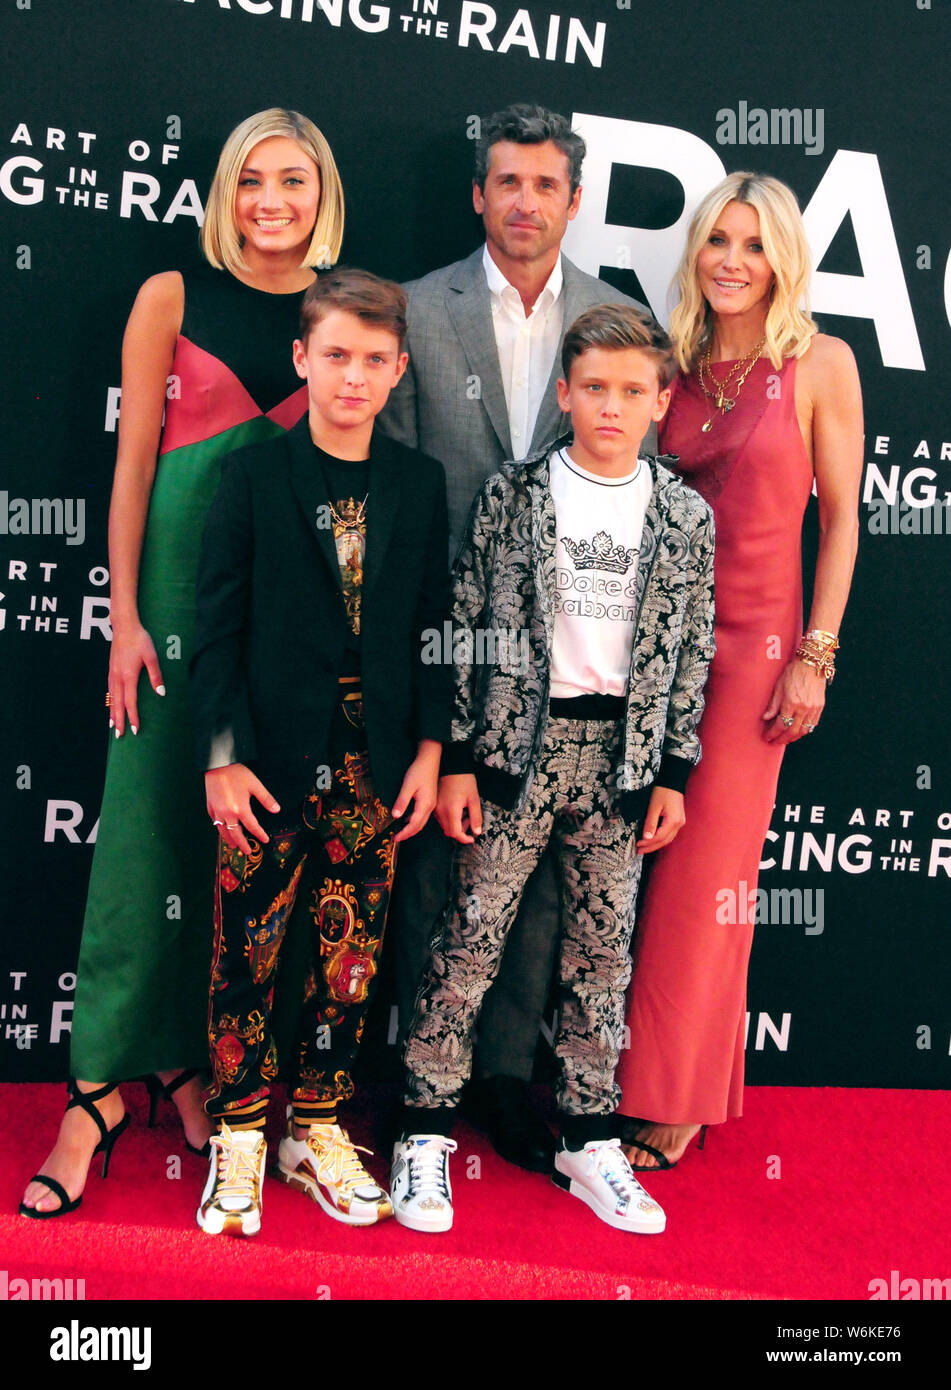 Hollywood, California, USA 1st August 2019 Producer/actor Patrick Dempsey attends 20th Century Fox's World Premiere of 'The Art Of Racing In The Rain' on August 1, 2019 at the El Capitan Theatre in Hollywood, California, USA. Photo by Barry King/Alamy Live News Stock Photo